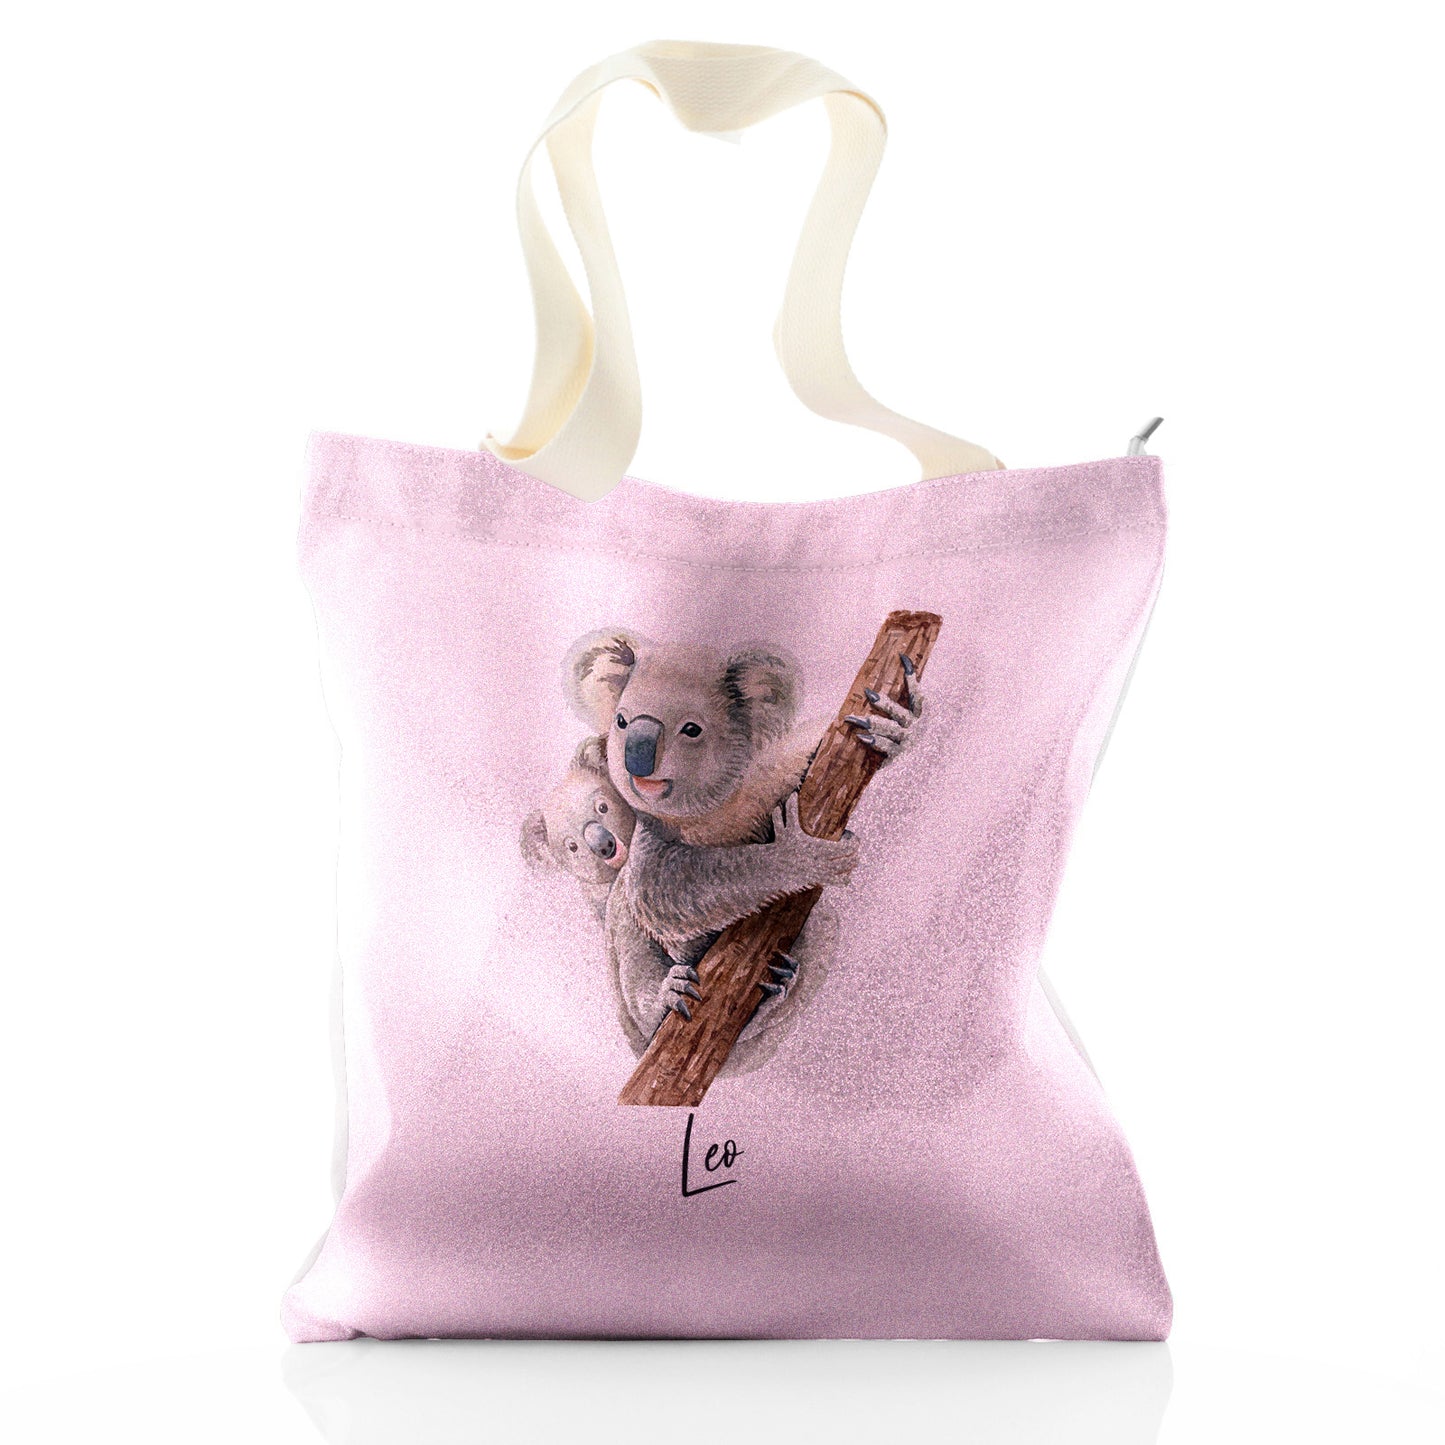 Personalised Glitter Tote Bag with Welcoming Text and Climbing Mum and Baby Koalas